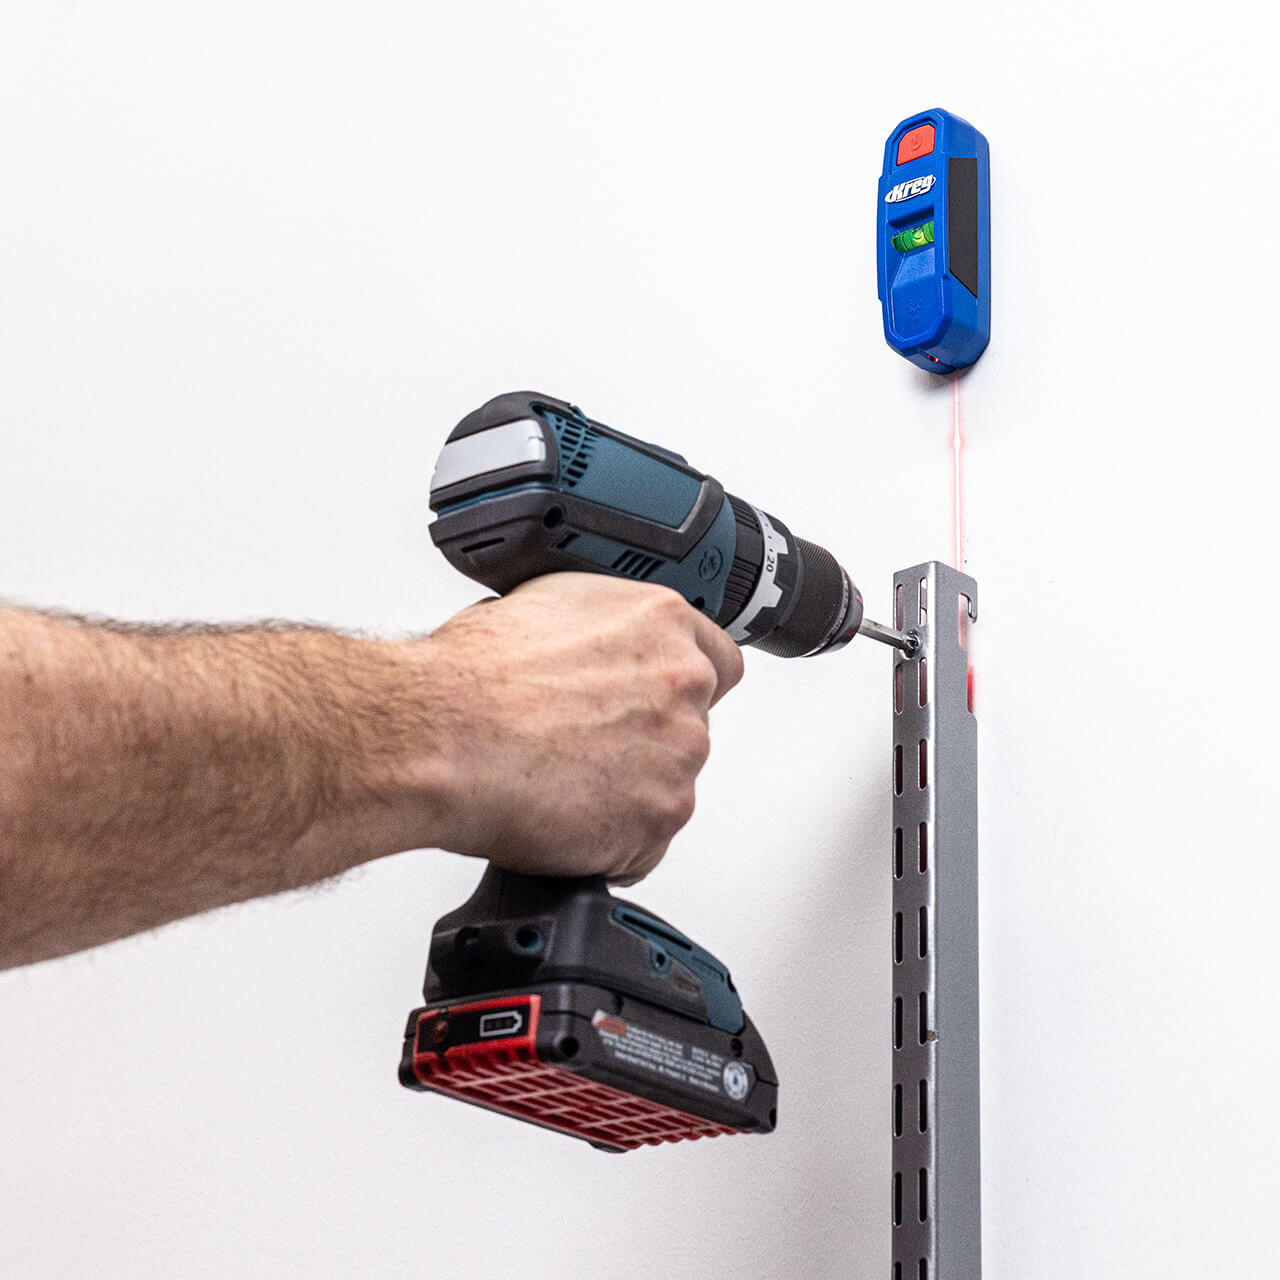 Kreg's new laser mark and regular stud finder are now available! 